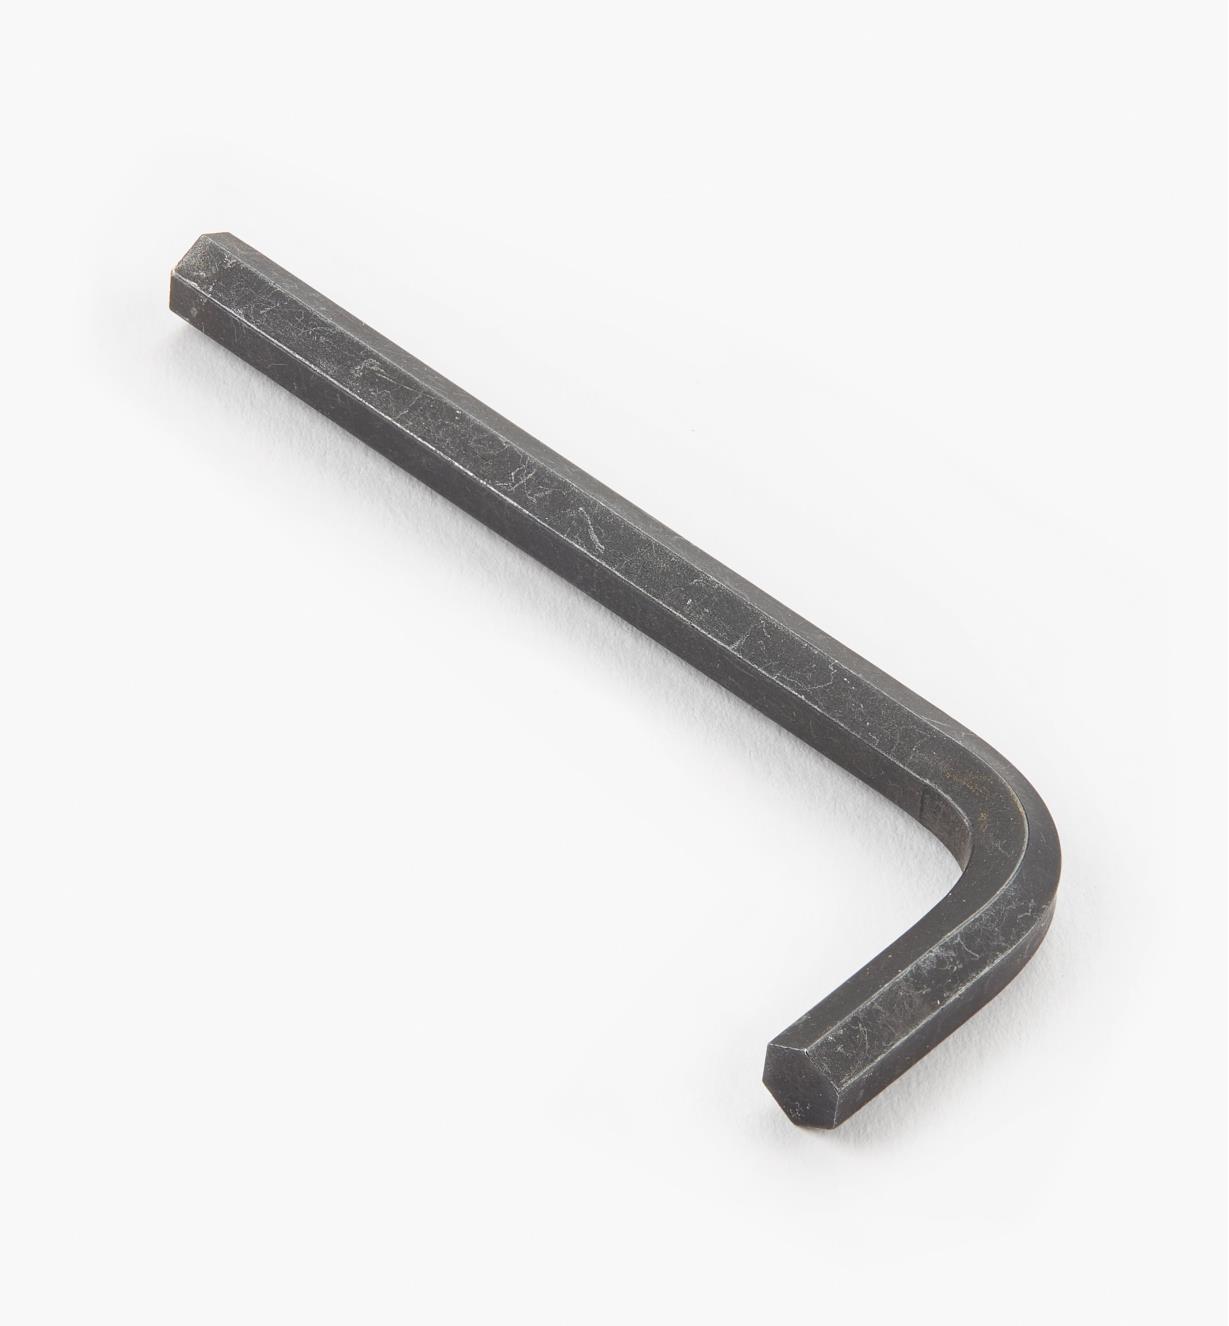 00M3022 - 5mm Hex Key for 1/4 20 Quick-Connect Hardware